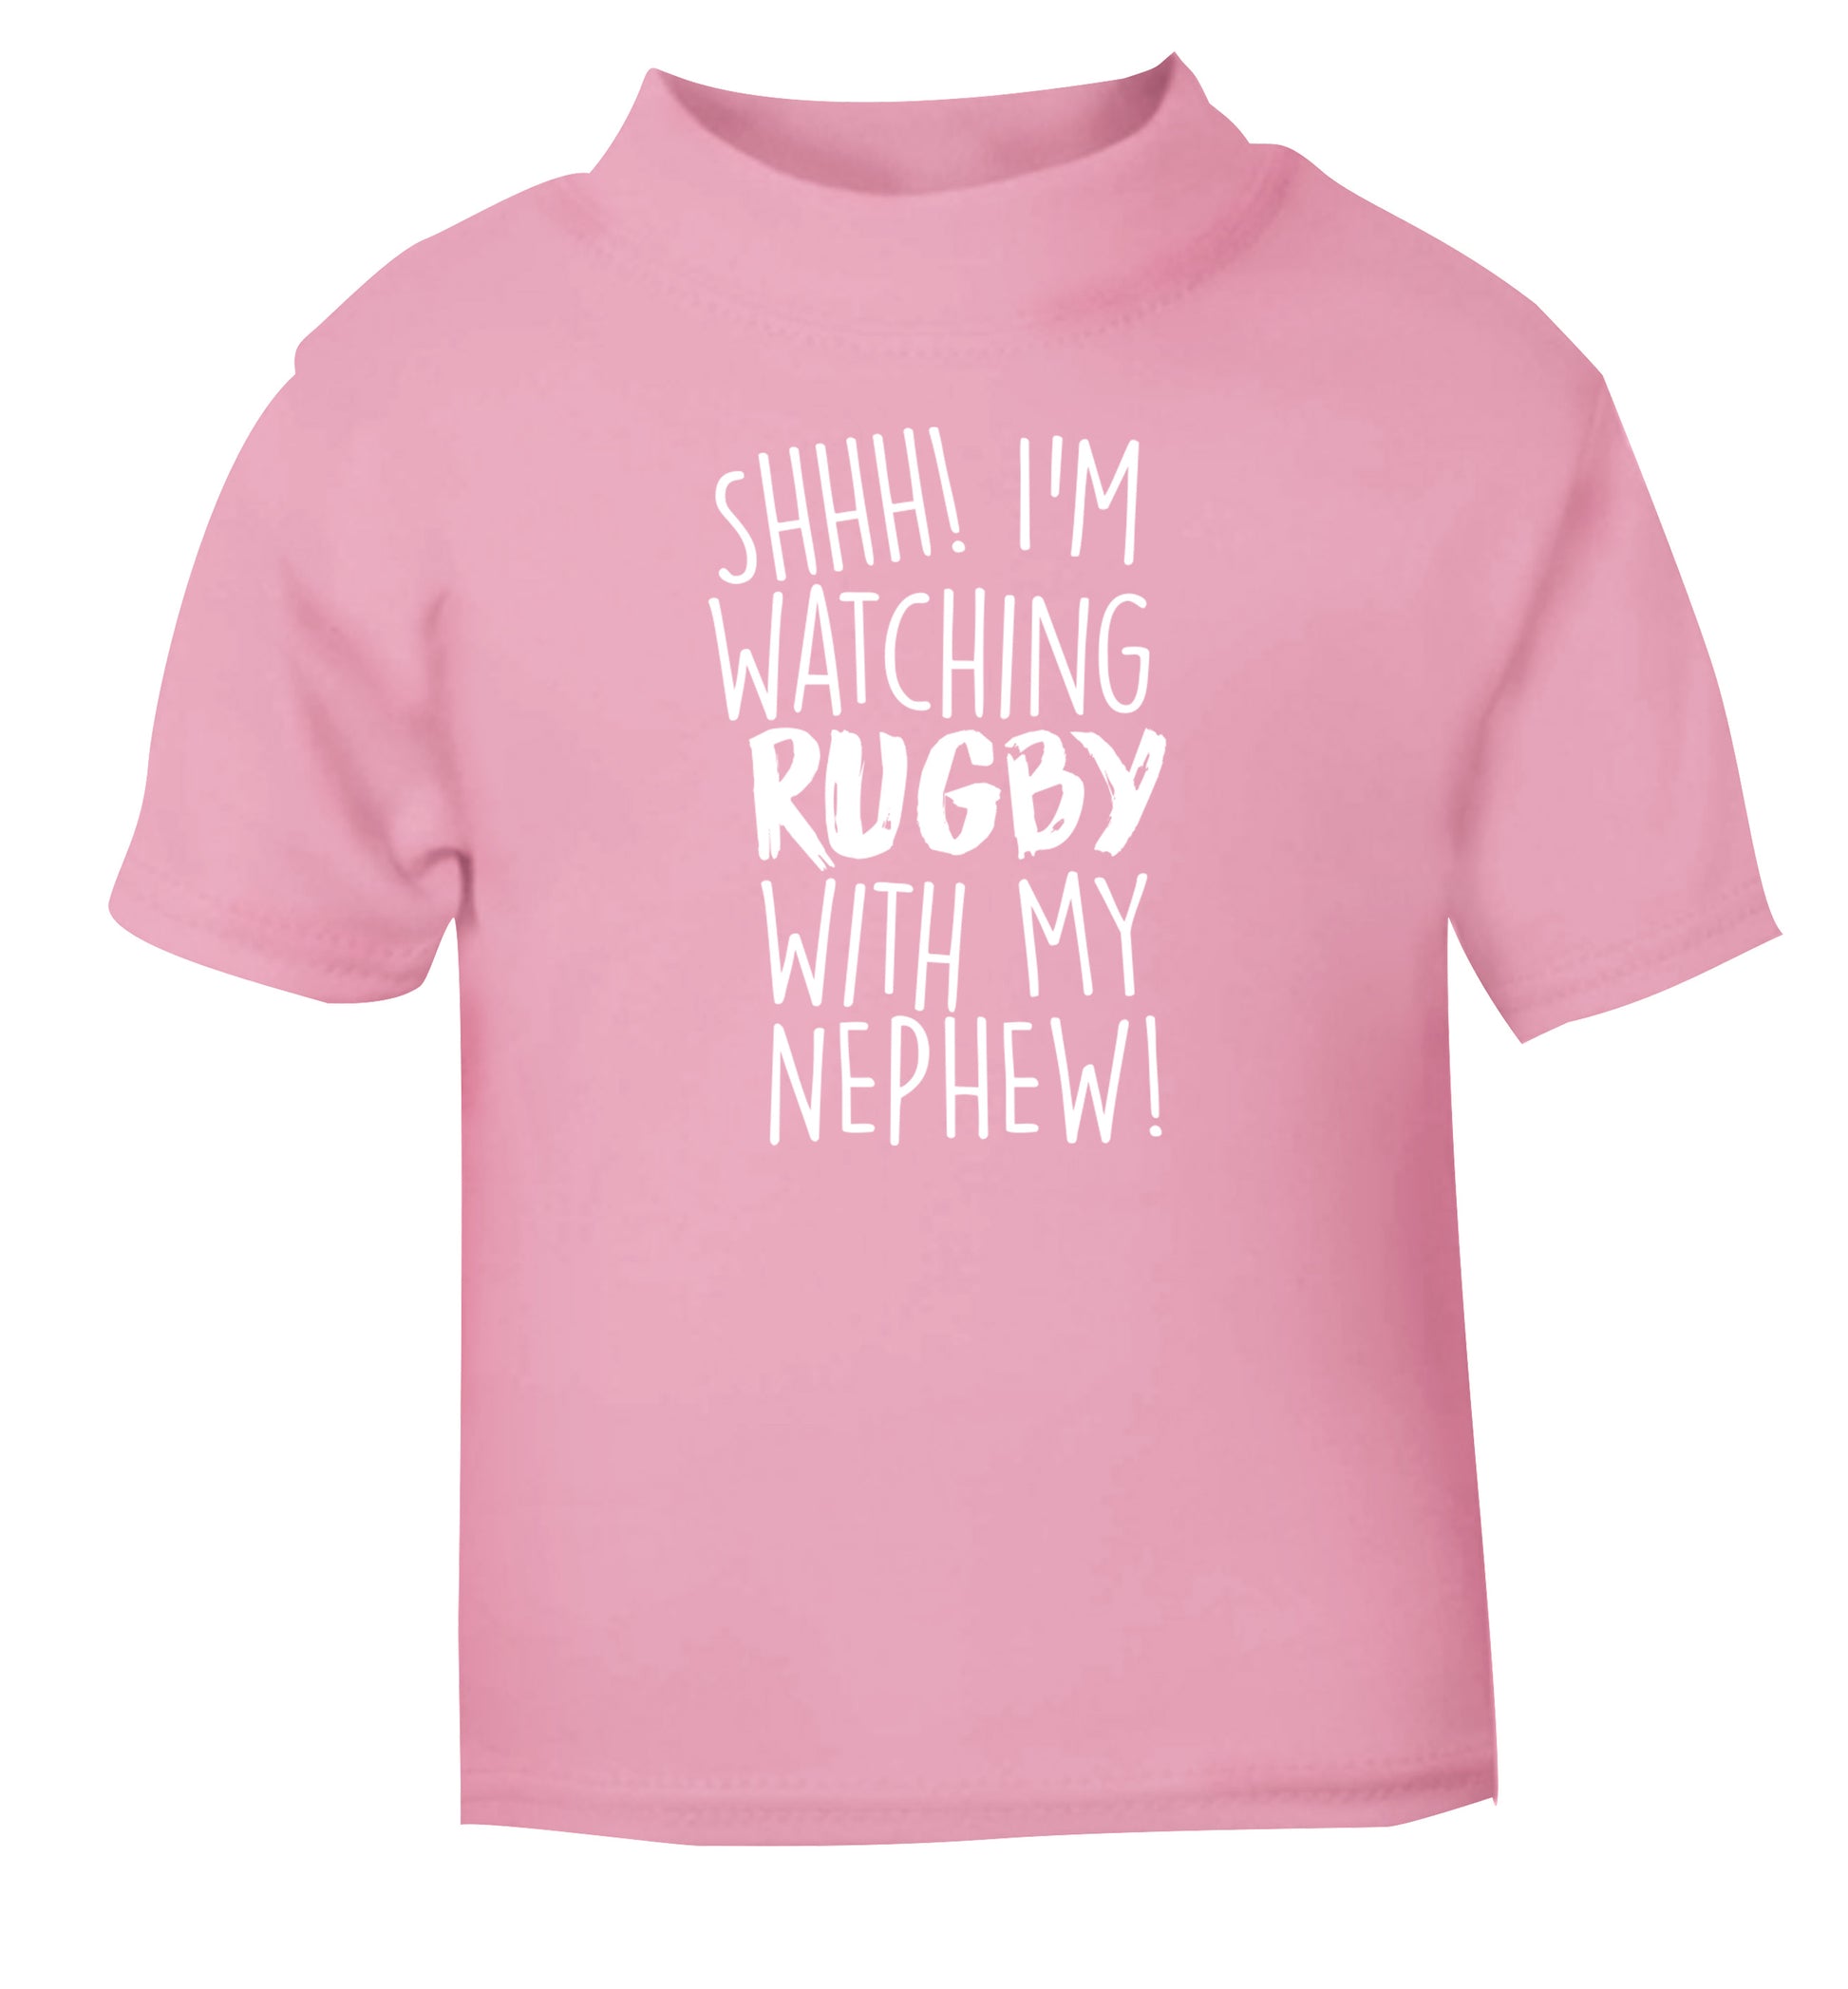 Shh.. I'm watching rugby with my nephew light pink Baby Toddler Tshirt 2 Years